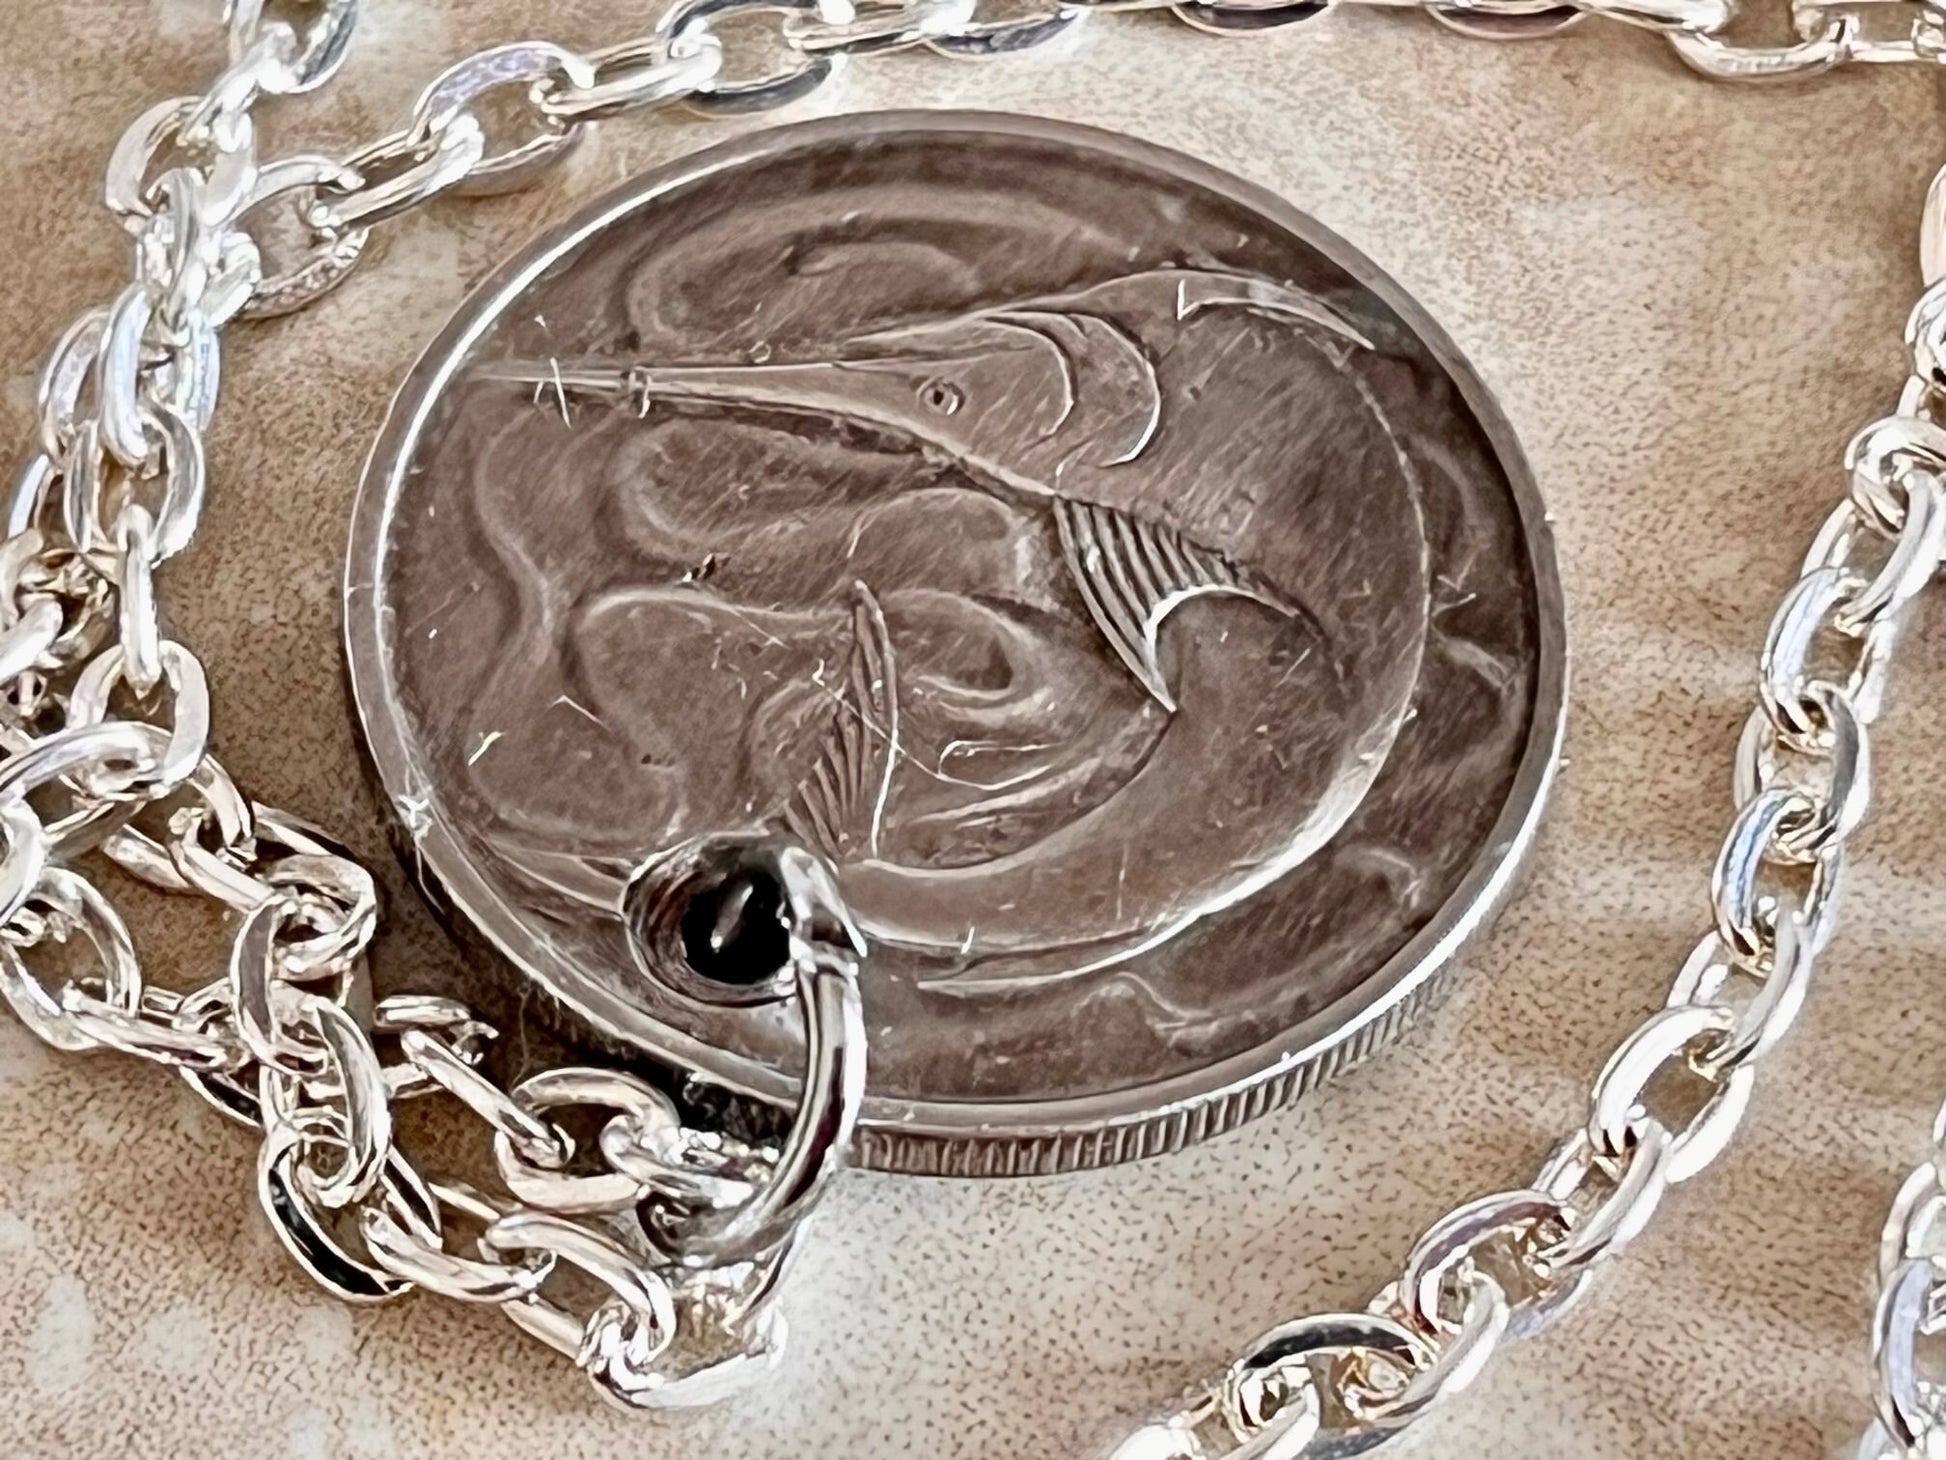 Singapore Hong Kong 20 Cent Coin Pendant Necklace PersonalOld Vintage Handmade Jewelry Gift Friend Charm For Him Her World Coin Collector